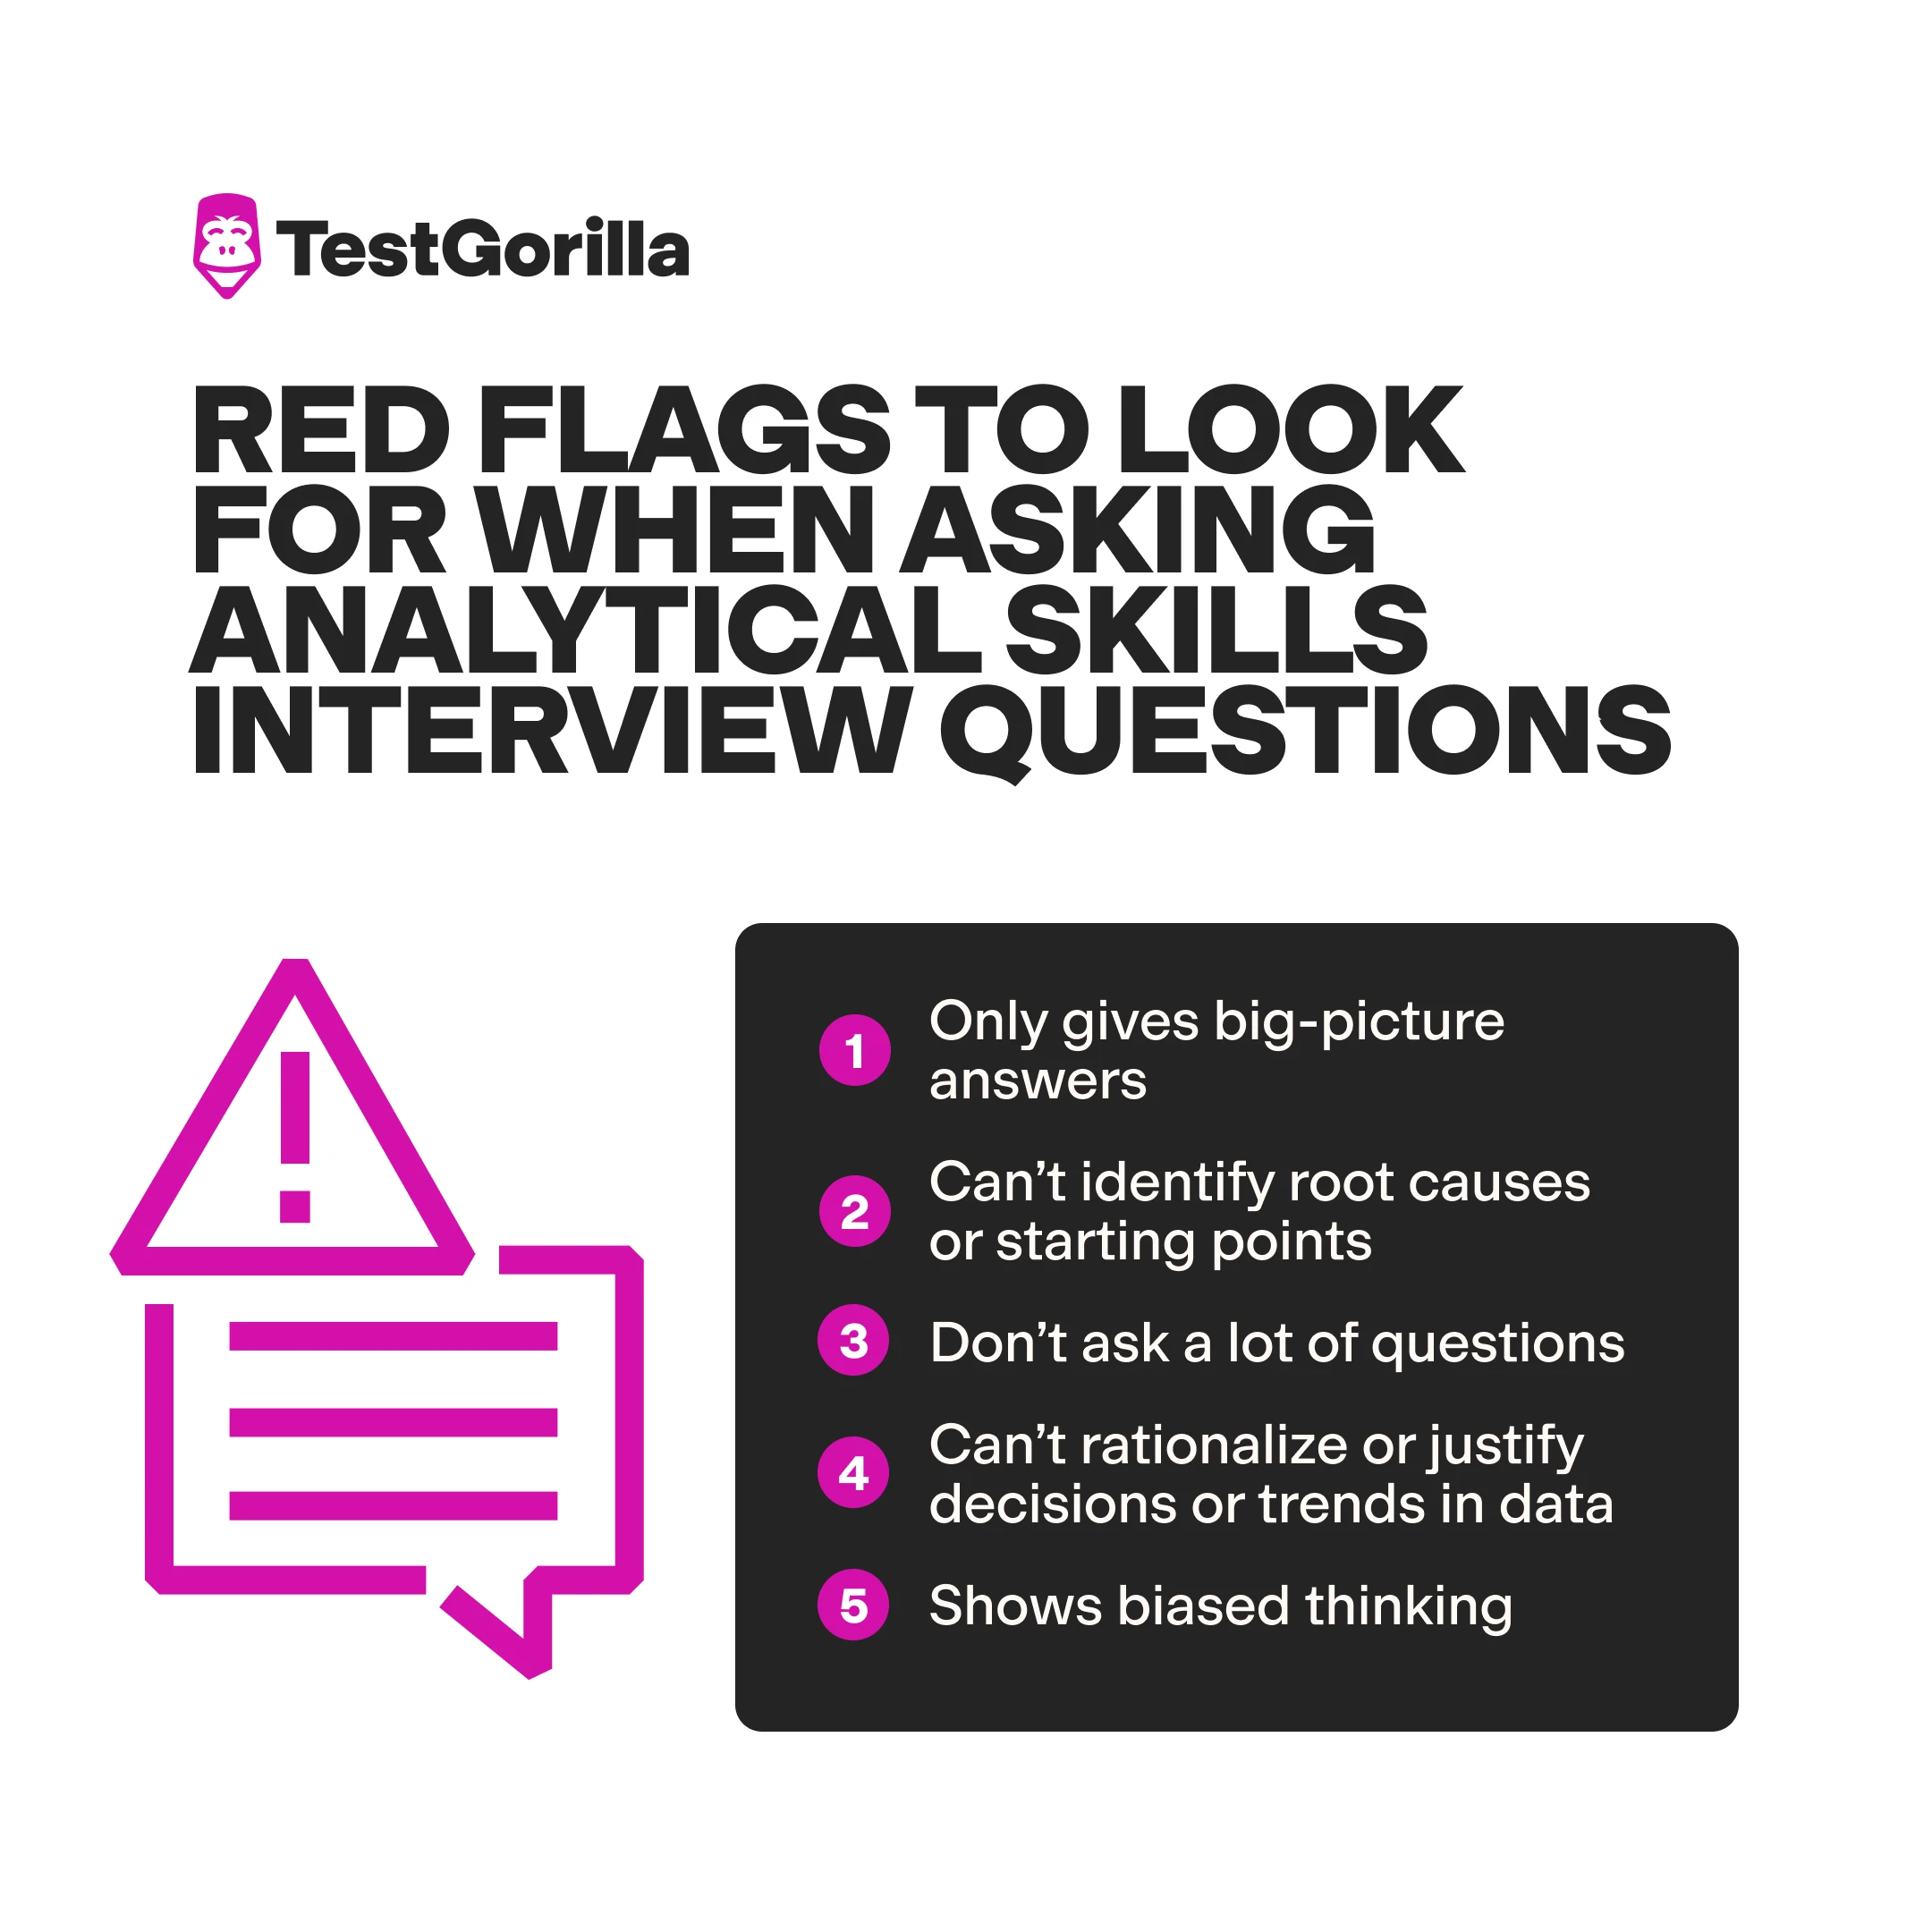 Red flags to look for when asking analytical skills interview questions graphic